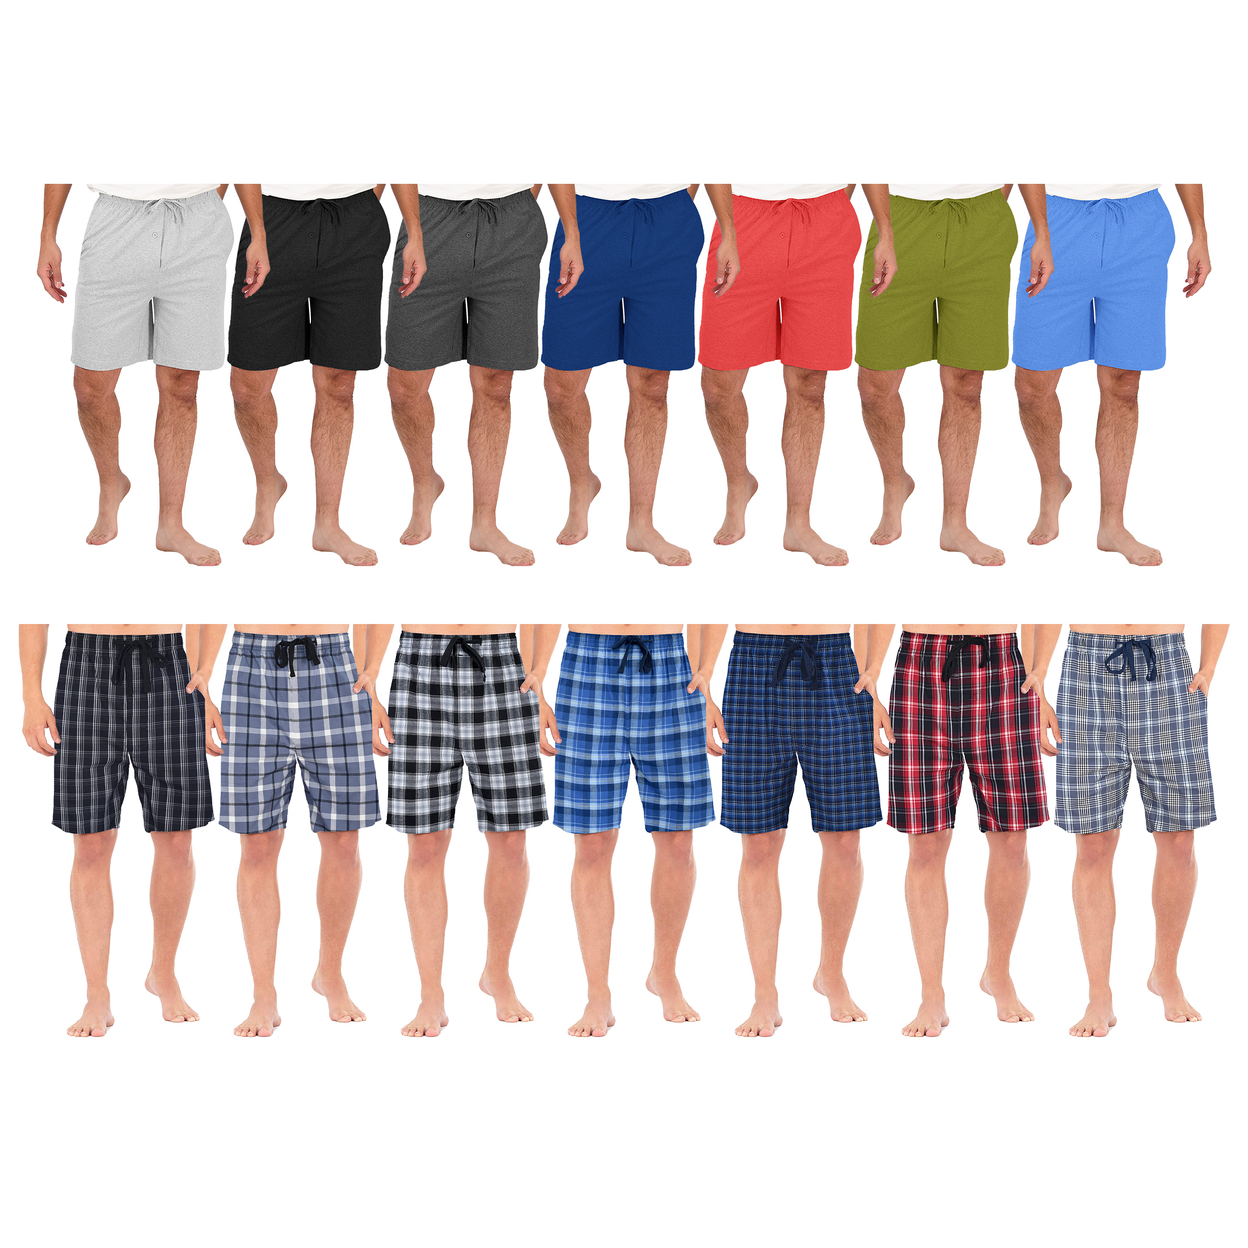 3-Pack: Men's Ultra Soft Knit Lounge Pajama Sleep Shorts - Solid, Small